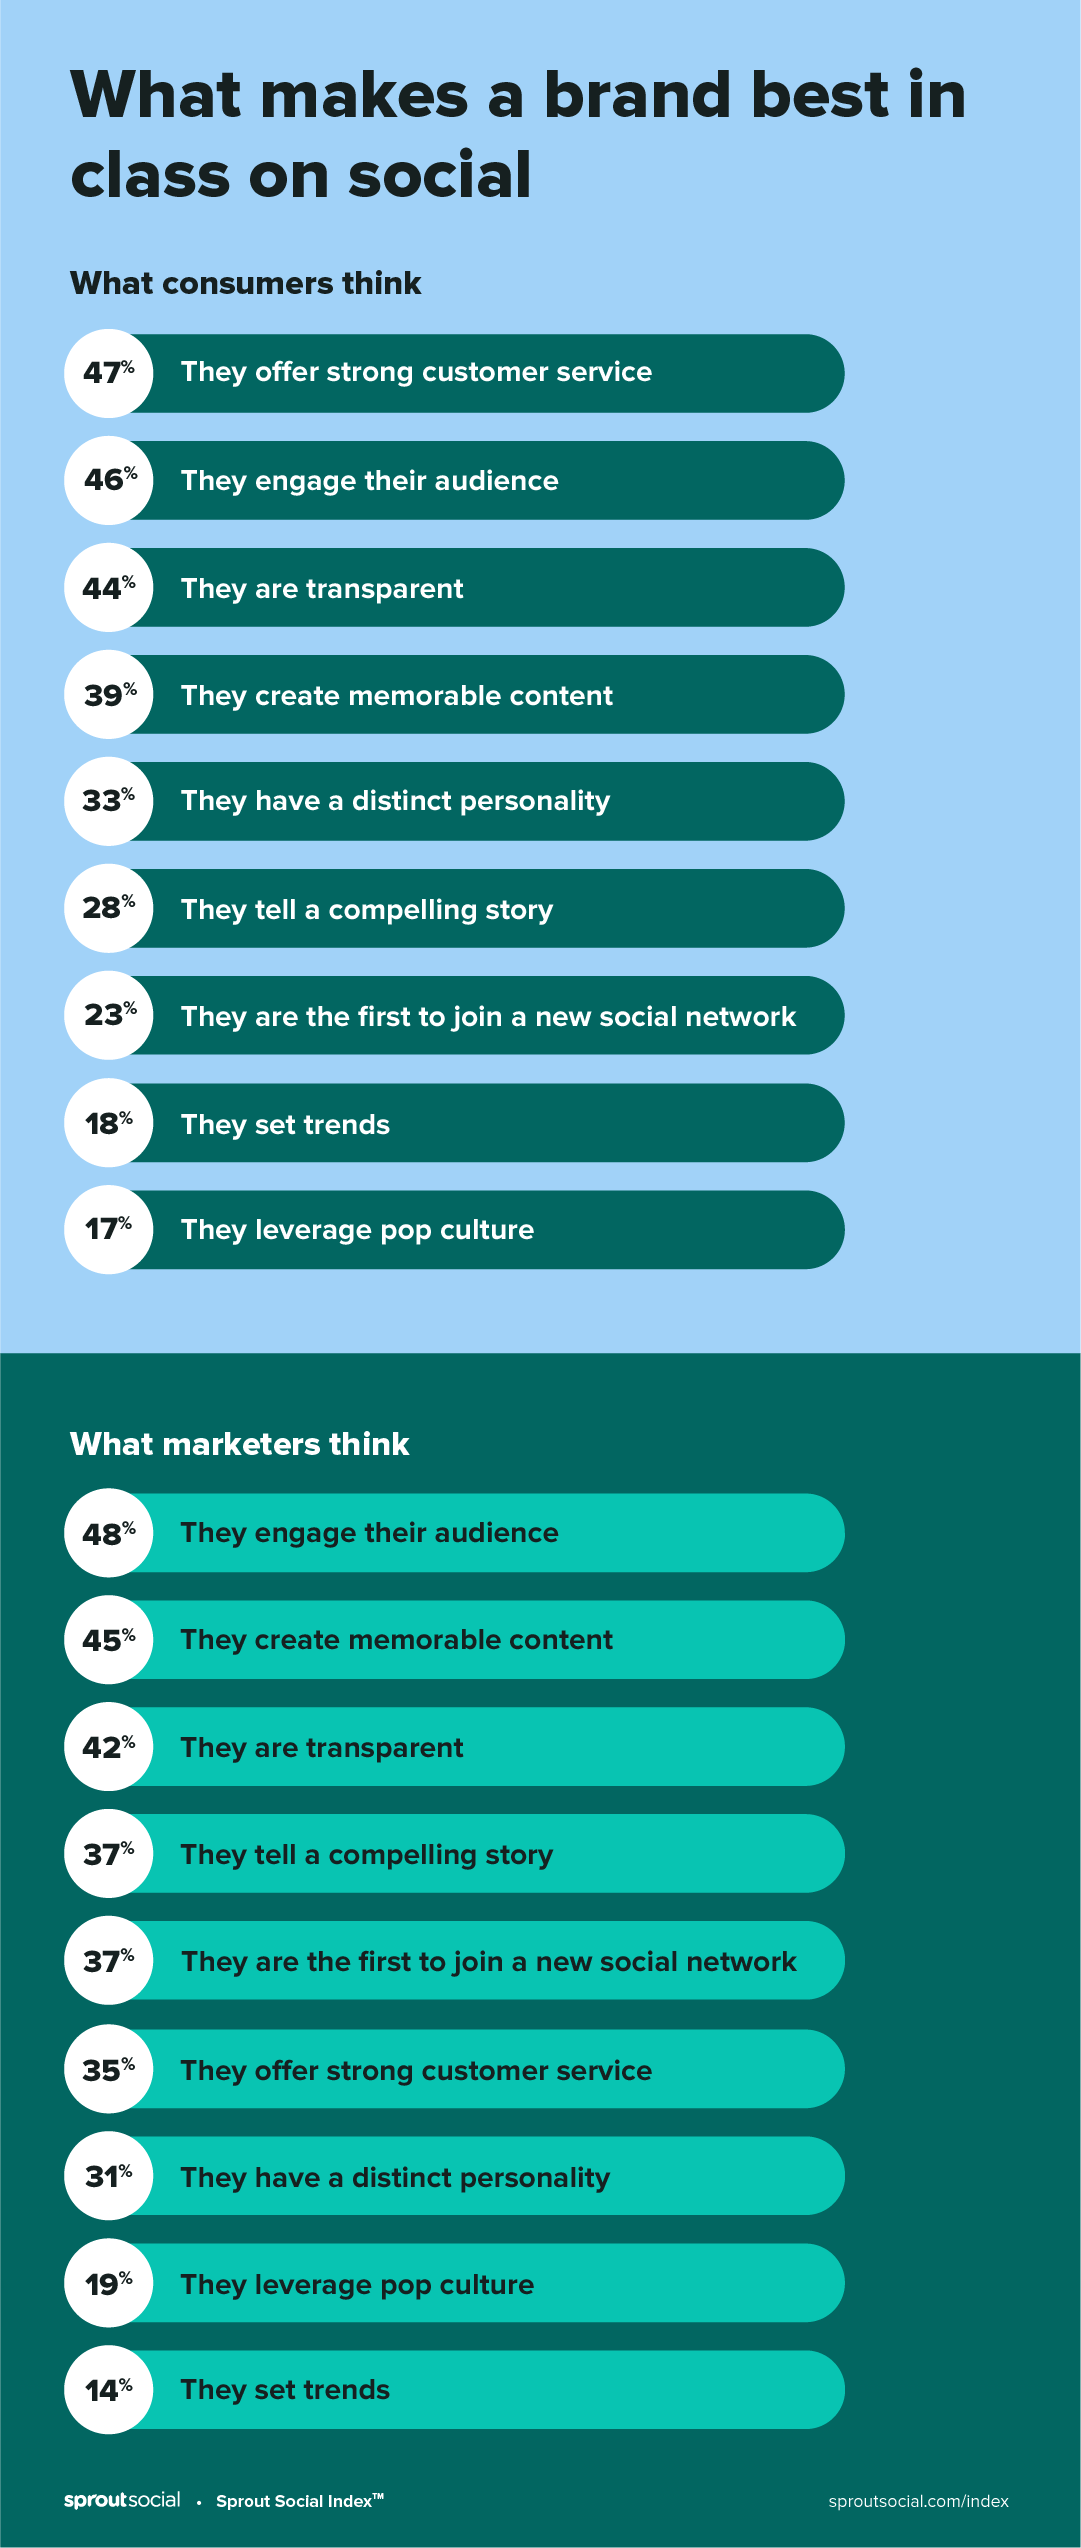 What makes a brand best in class on social: what marketers think vs what consumers think